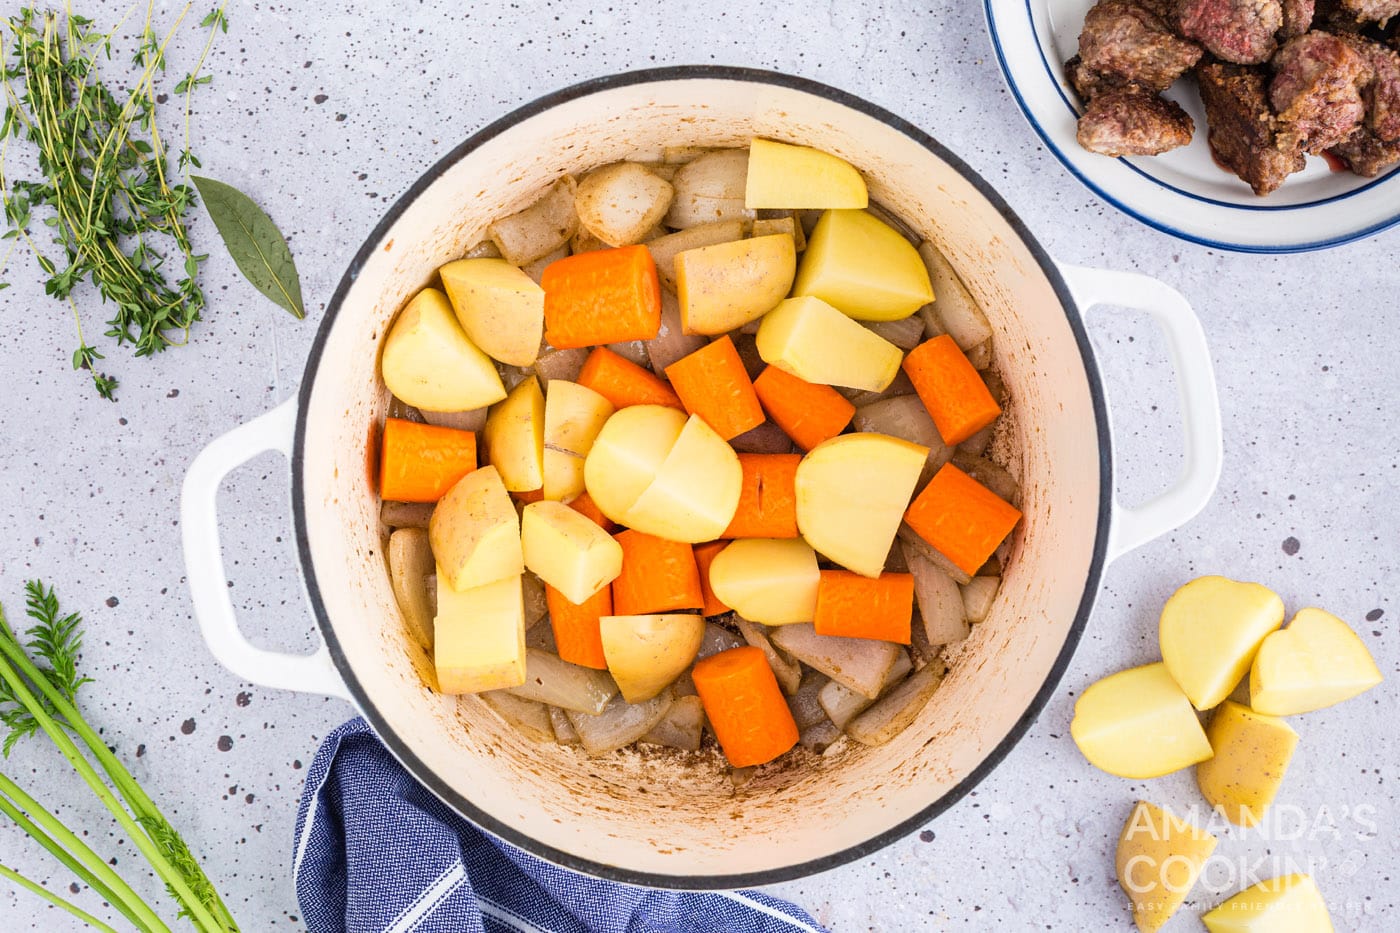 add potatoes and carrots to the pot